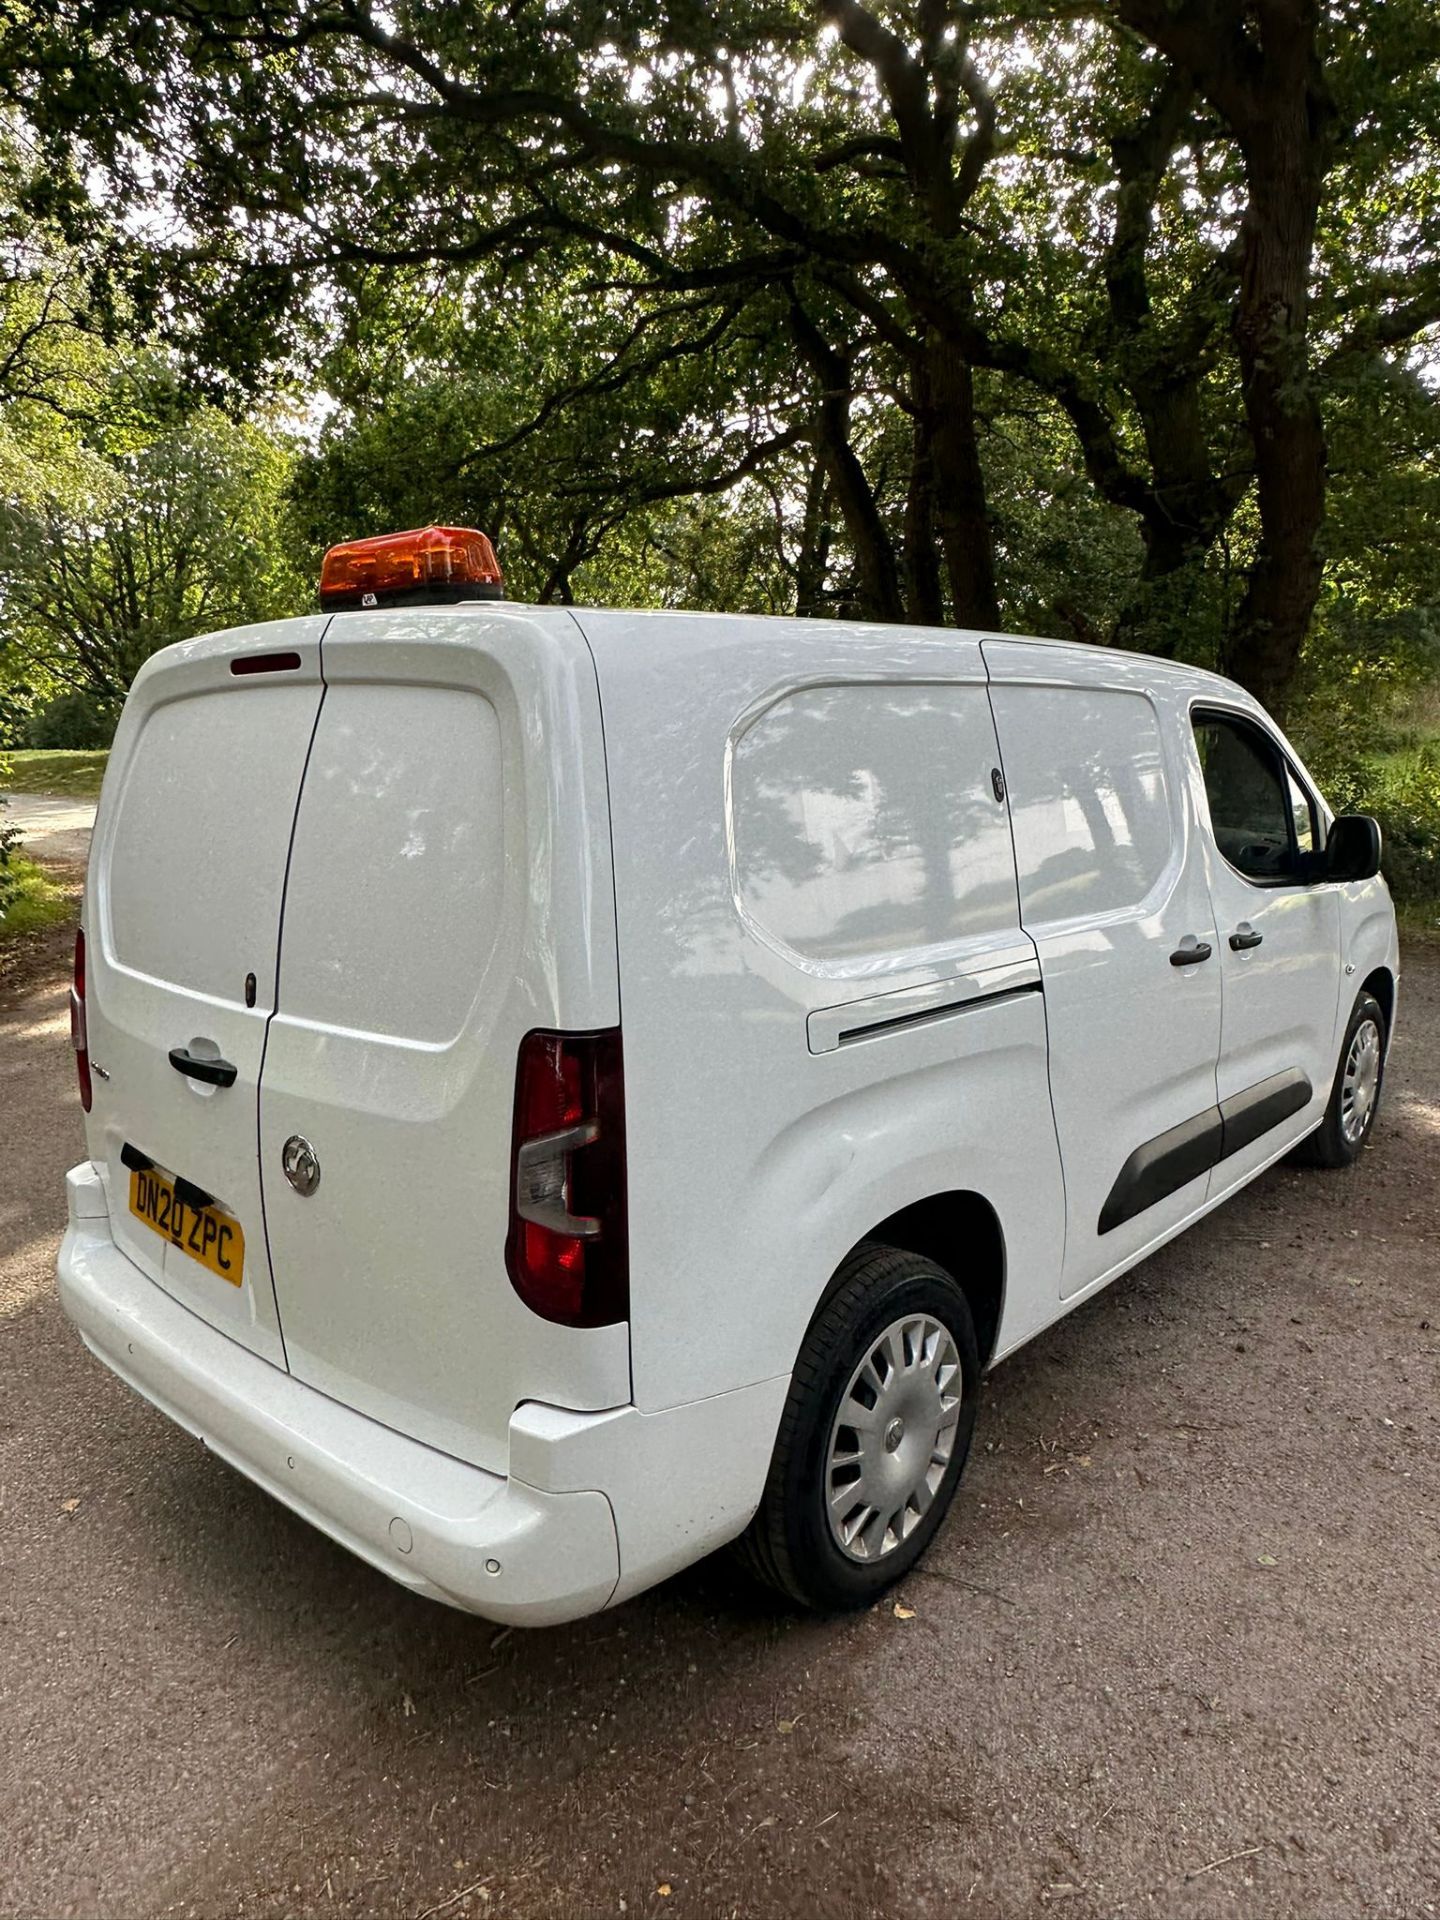 2020 20 Vauxhall combo sportive Panel van - 73k miles - Euro 6 - Lwb - Air con - ply lined - Image 7 of 10